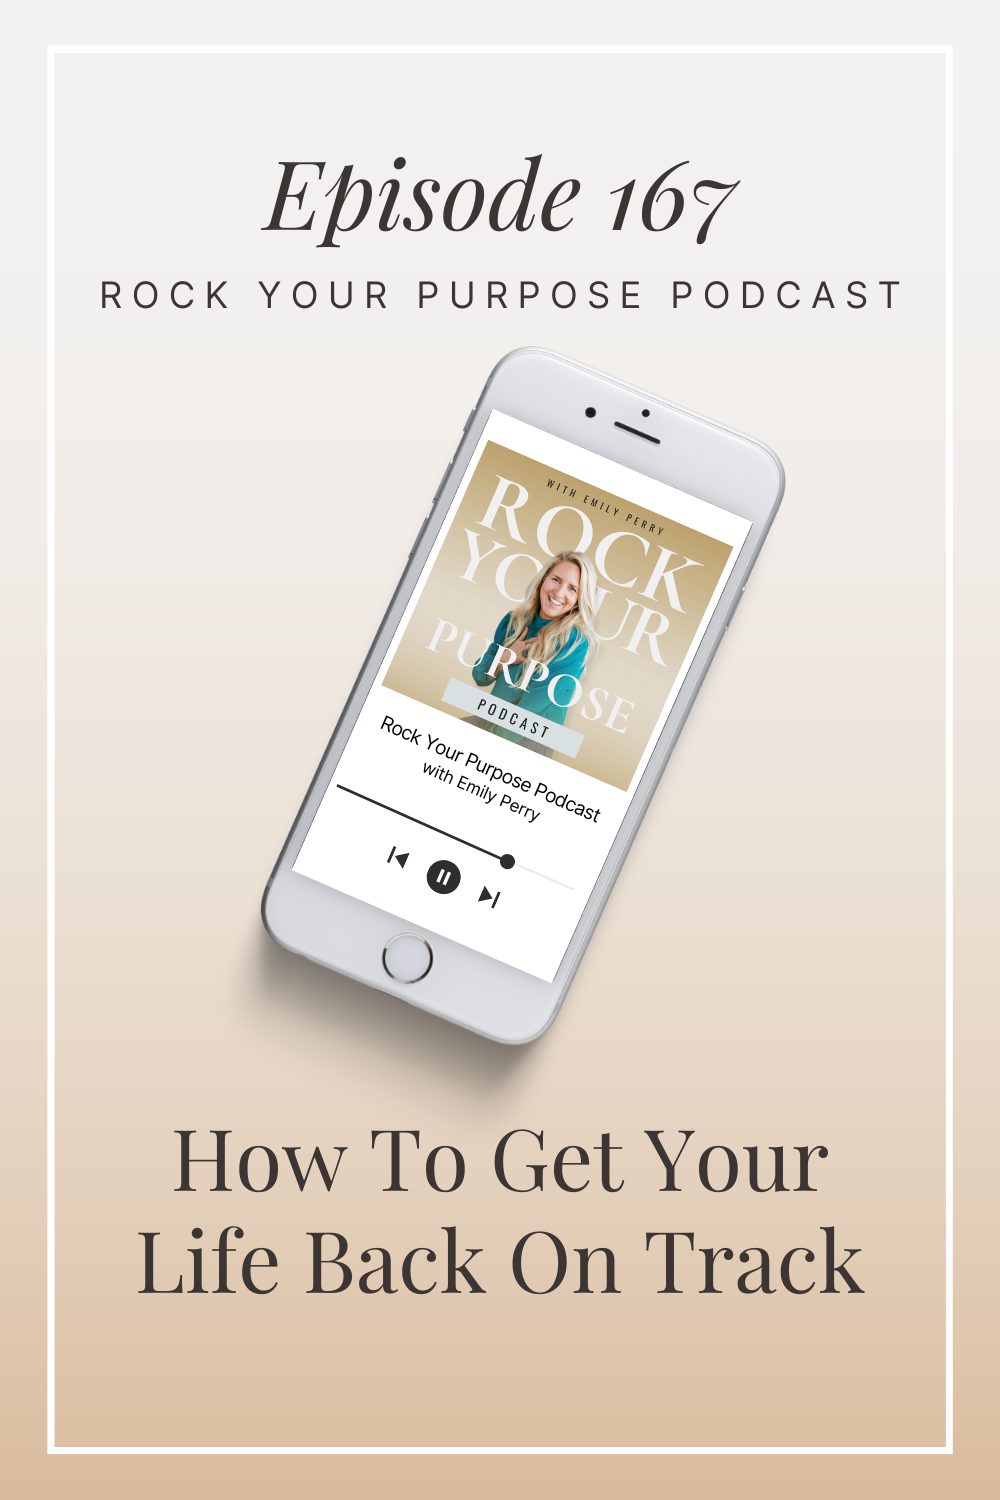 Episode 167 How To Get Your Life Back On Track rock your purpose podcast emily perry